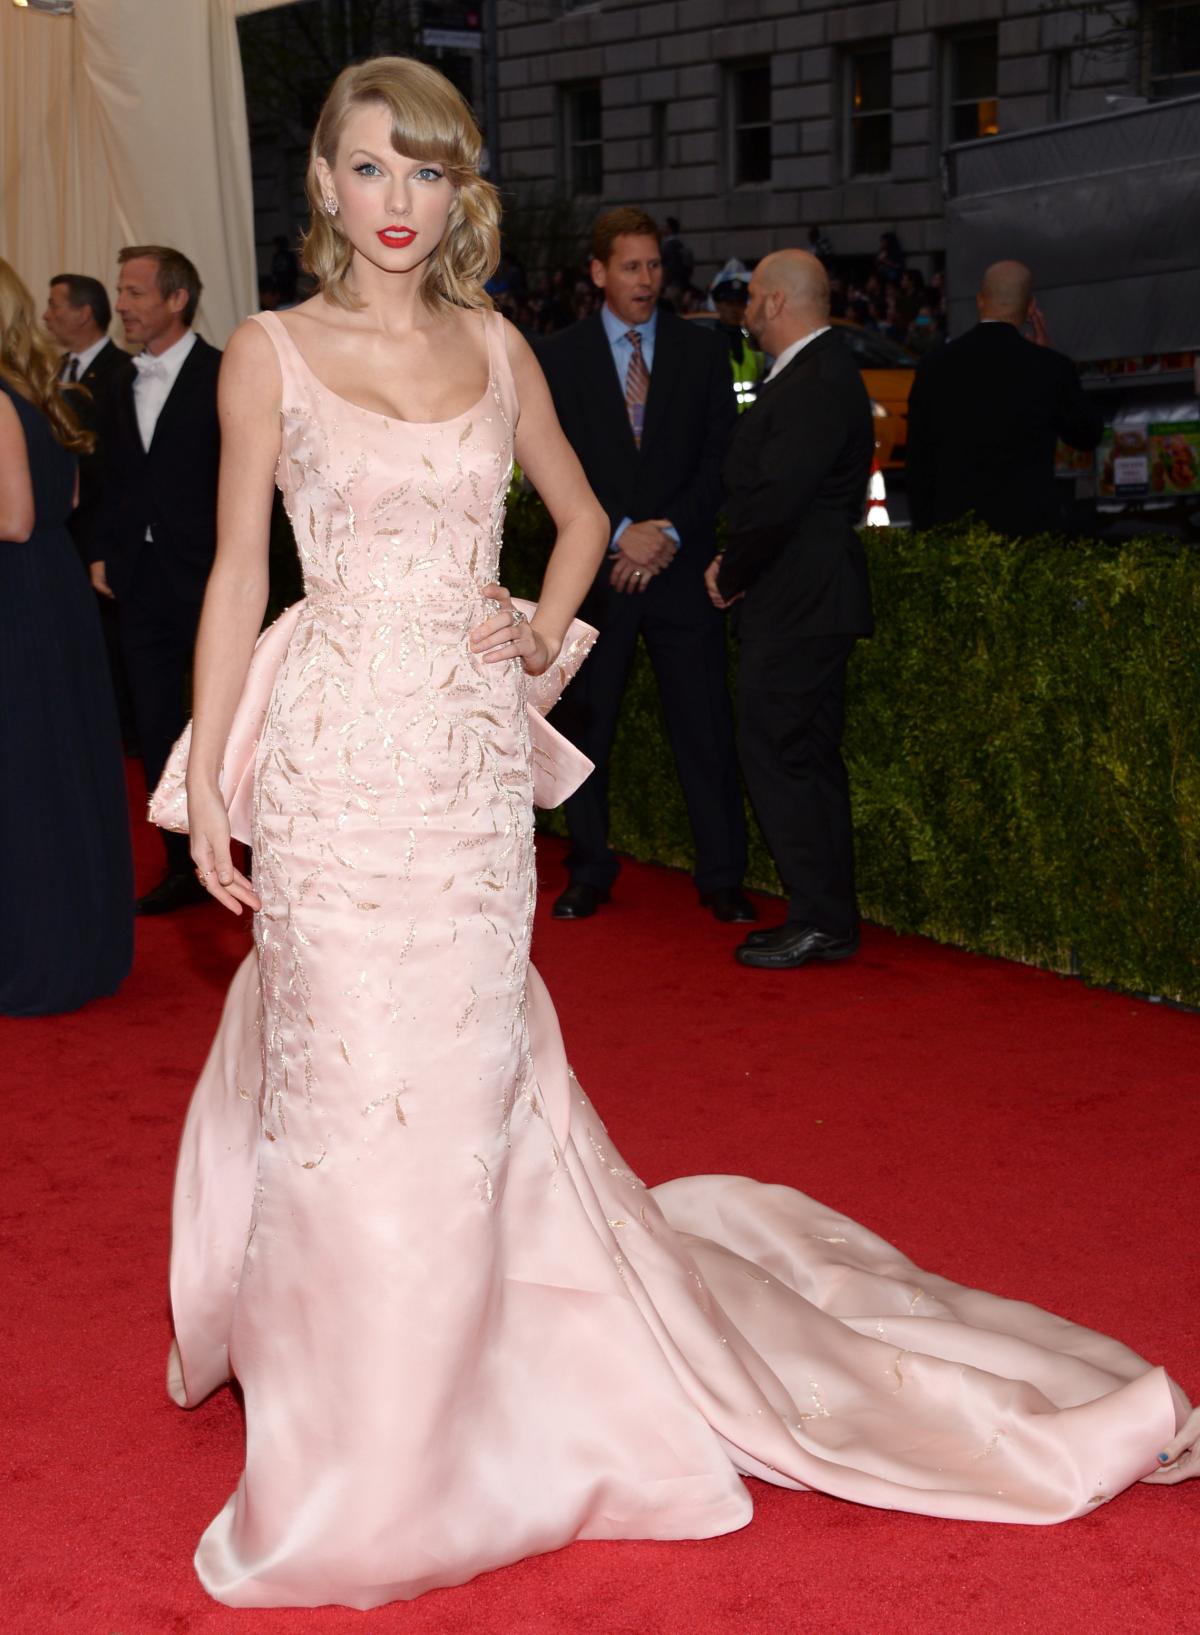 Taylor Swift is Best Dressed Star of 2014